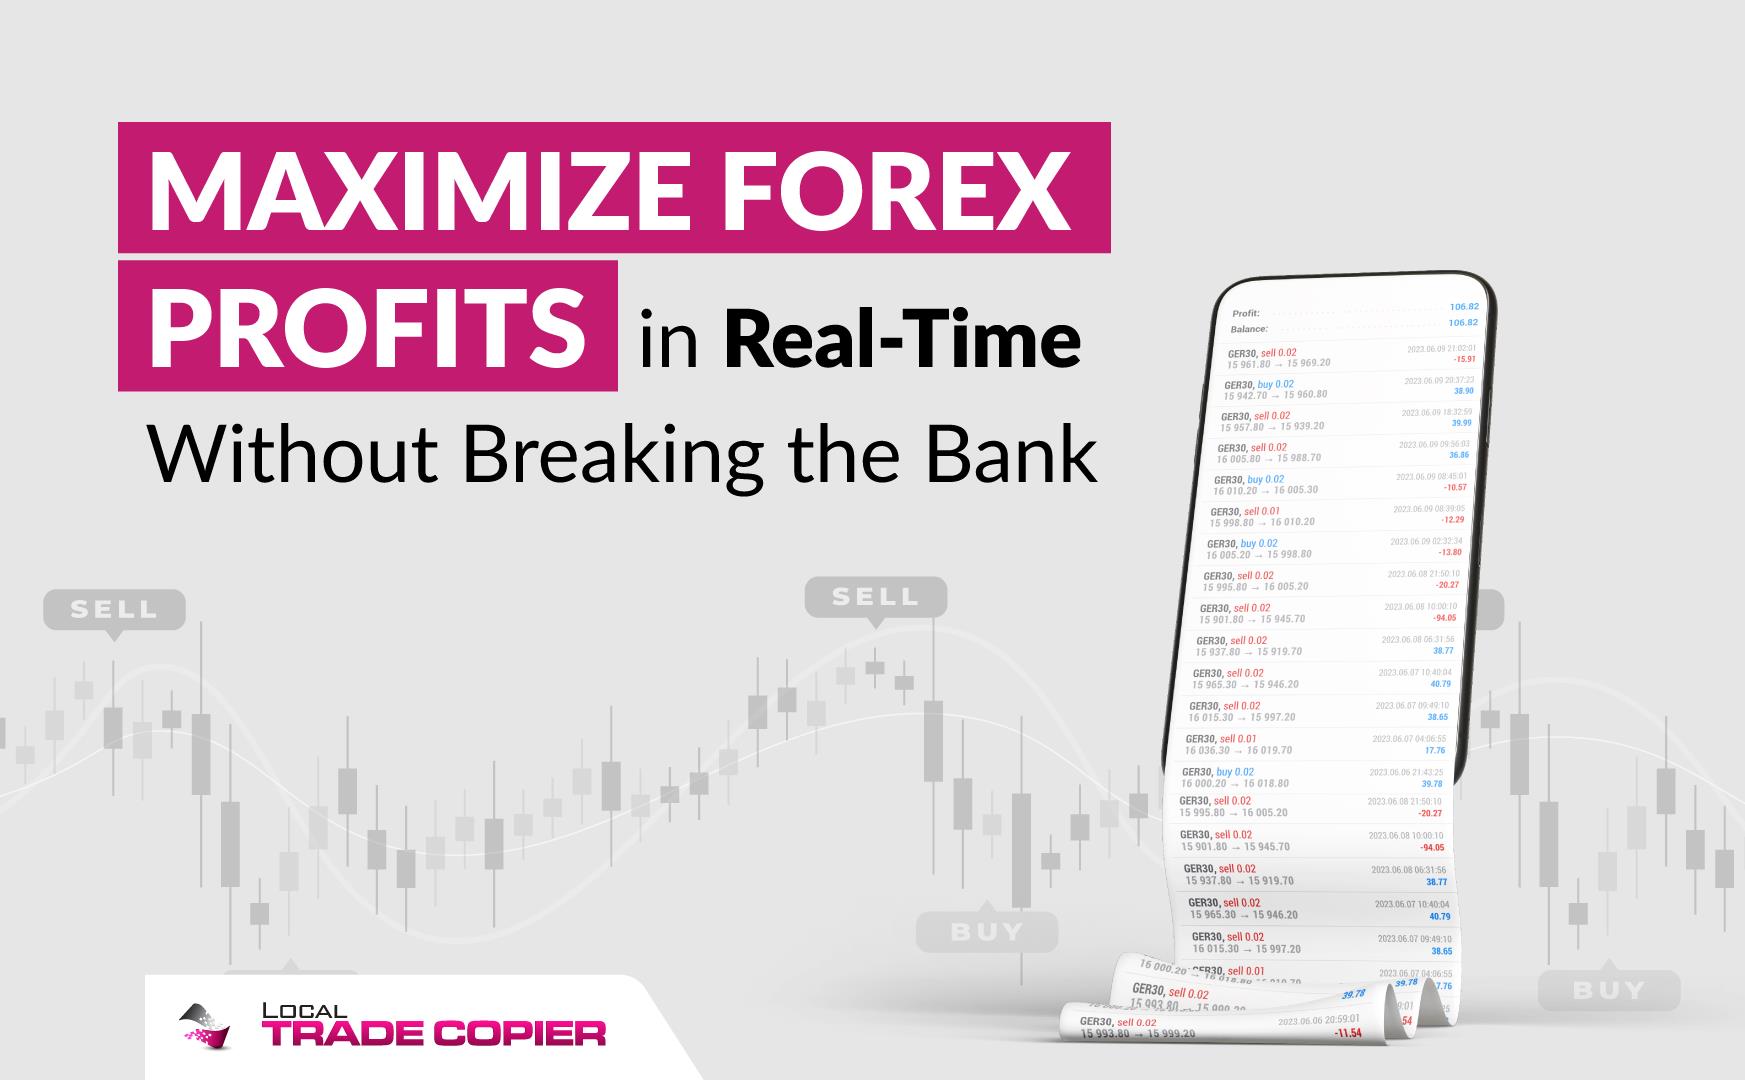 Local Trade copier: Maximize Forex Profits in Real-Time Without Breaking the Bank